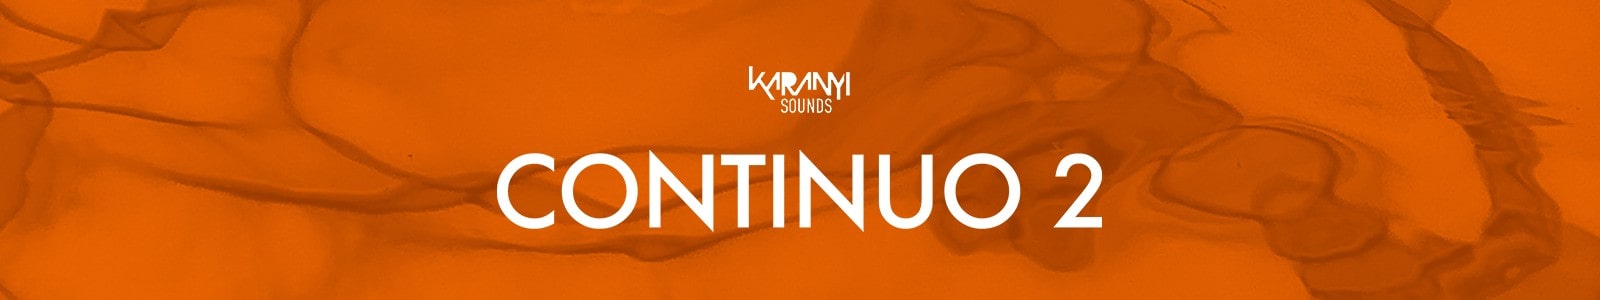 Continuo 2 by Karanyi Sounds